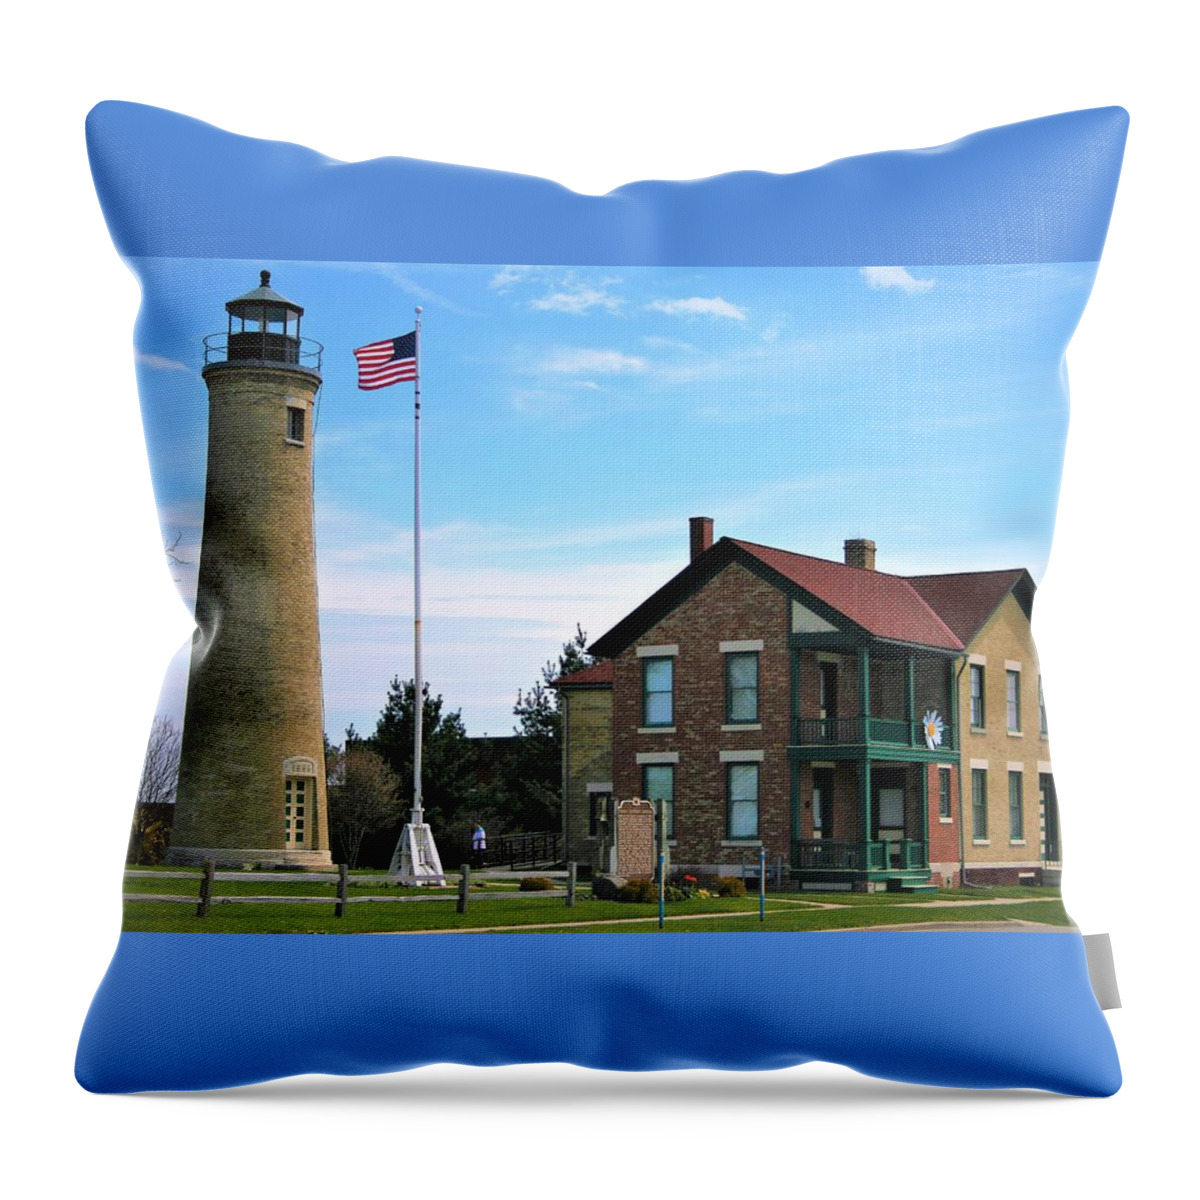 Southport Throw Pillow featuring the photograph Southport Lighthouse And Maritime Museum by Kay Novy